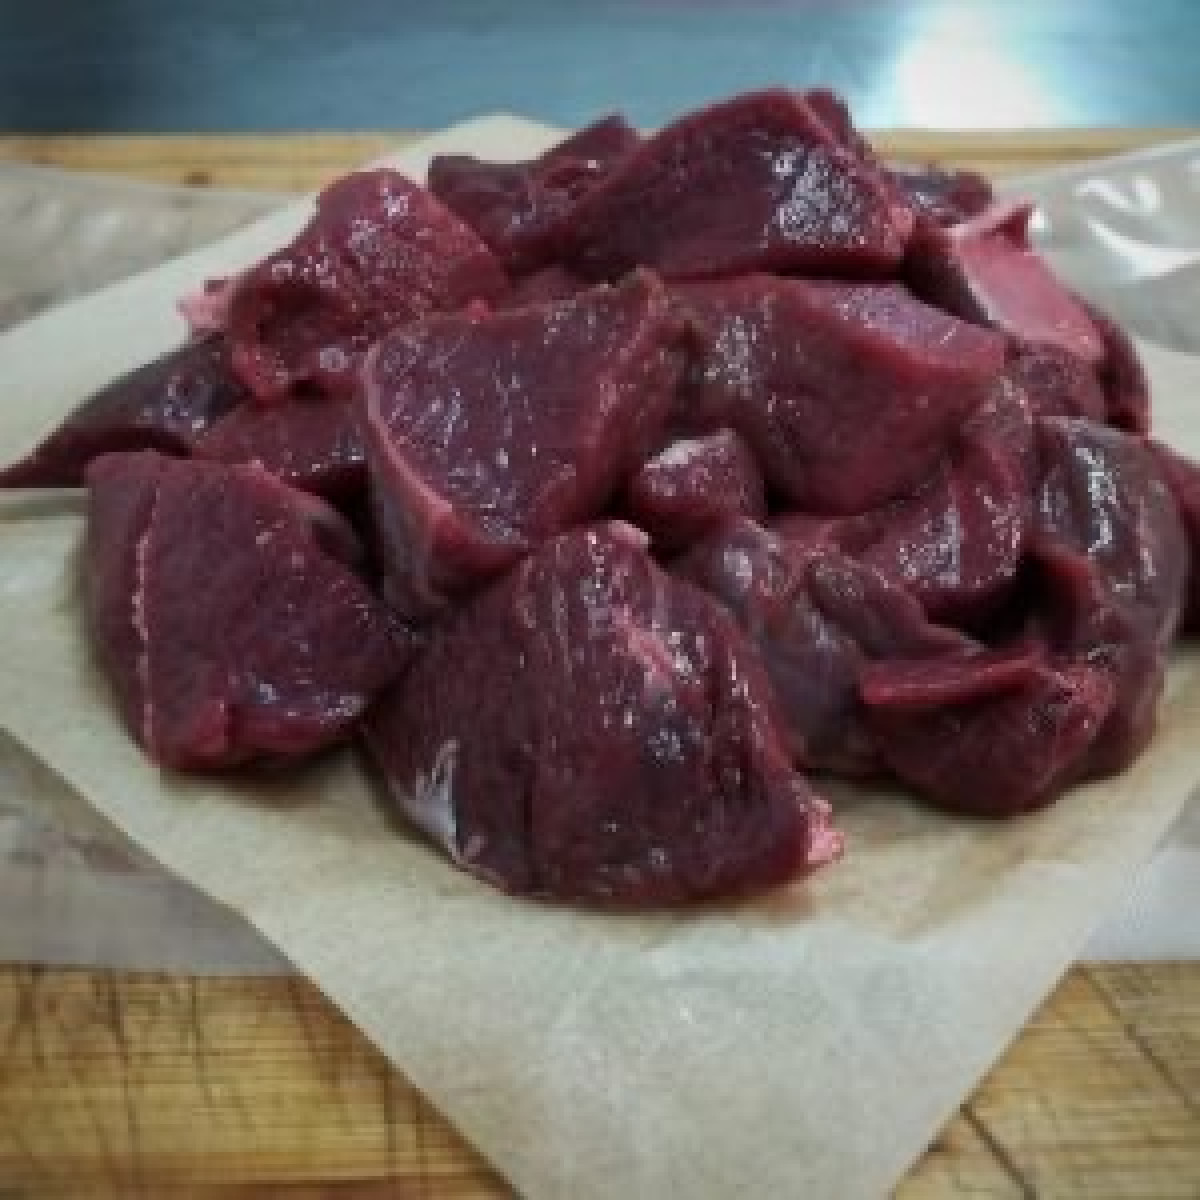 Product picture for Diced venison